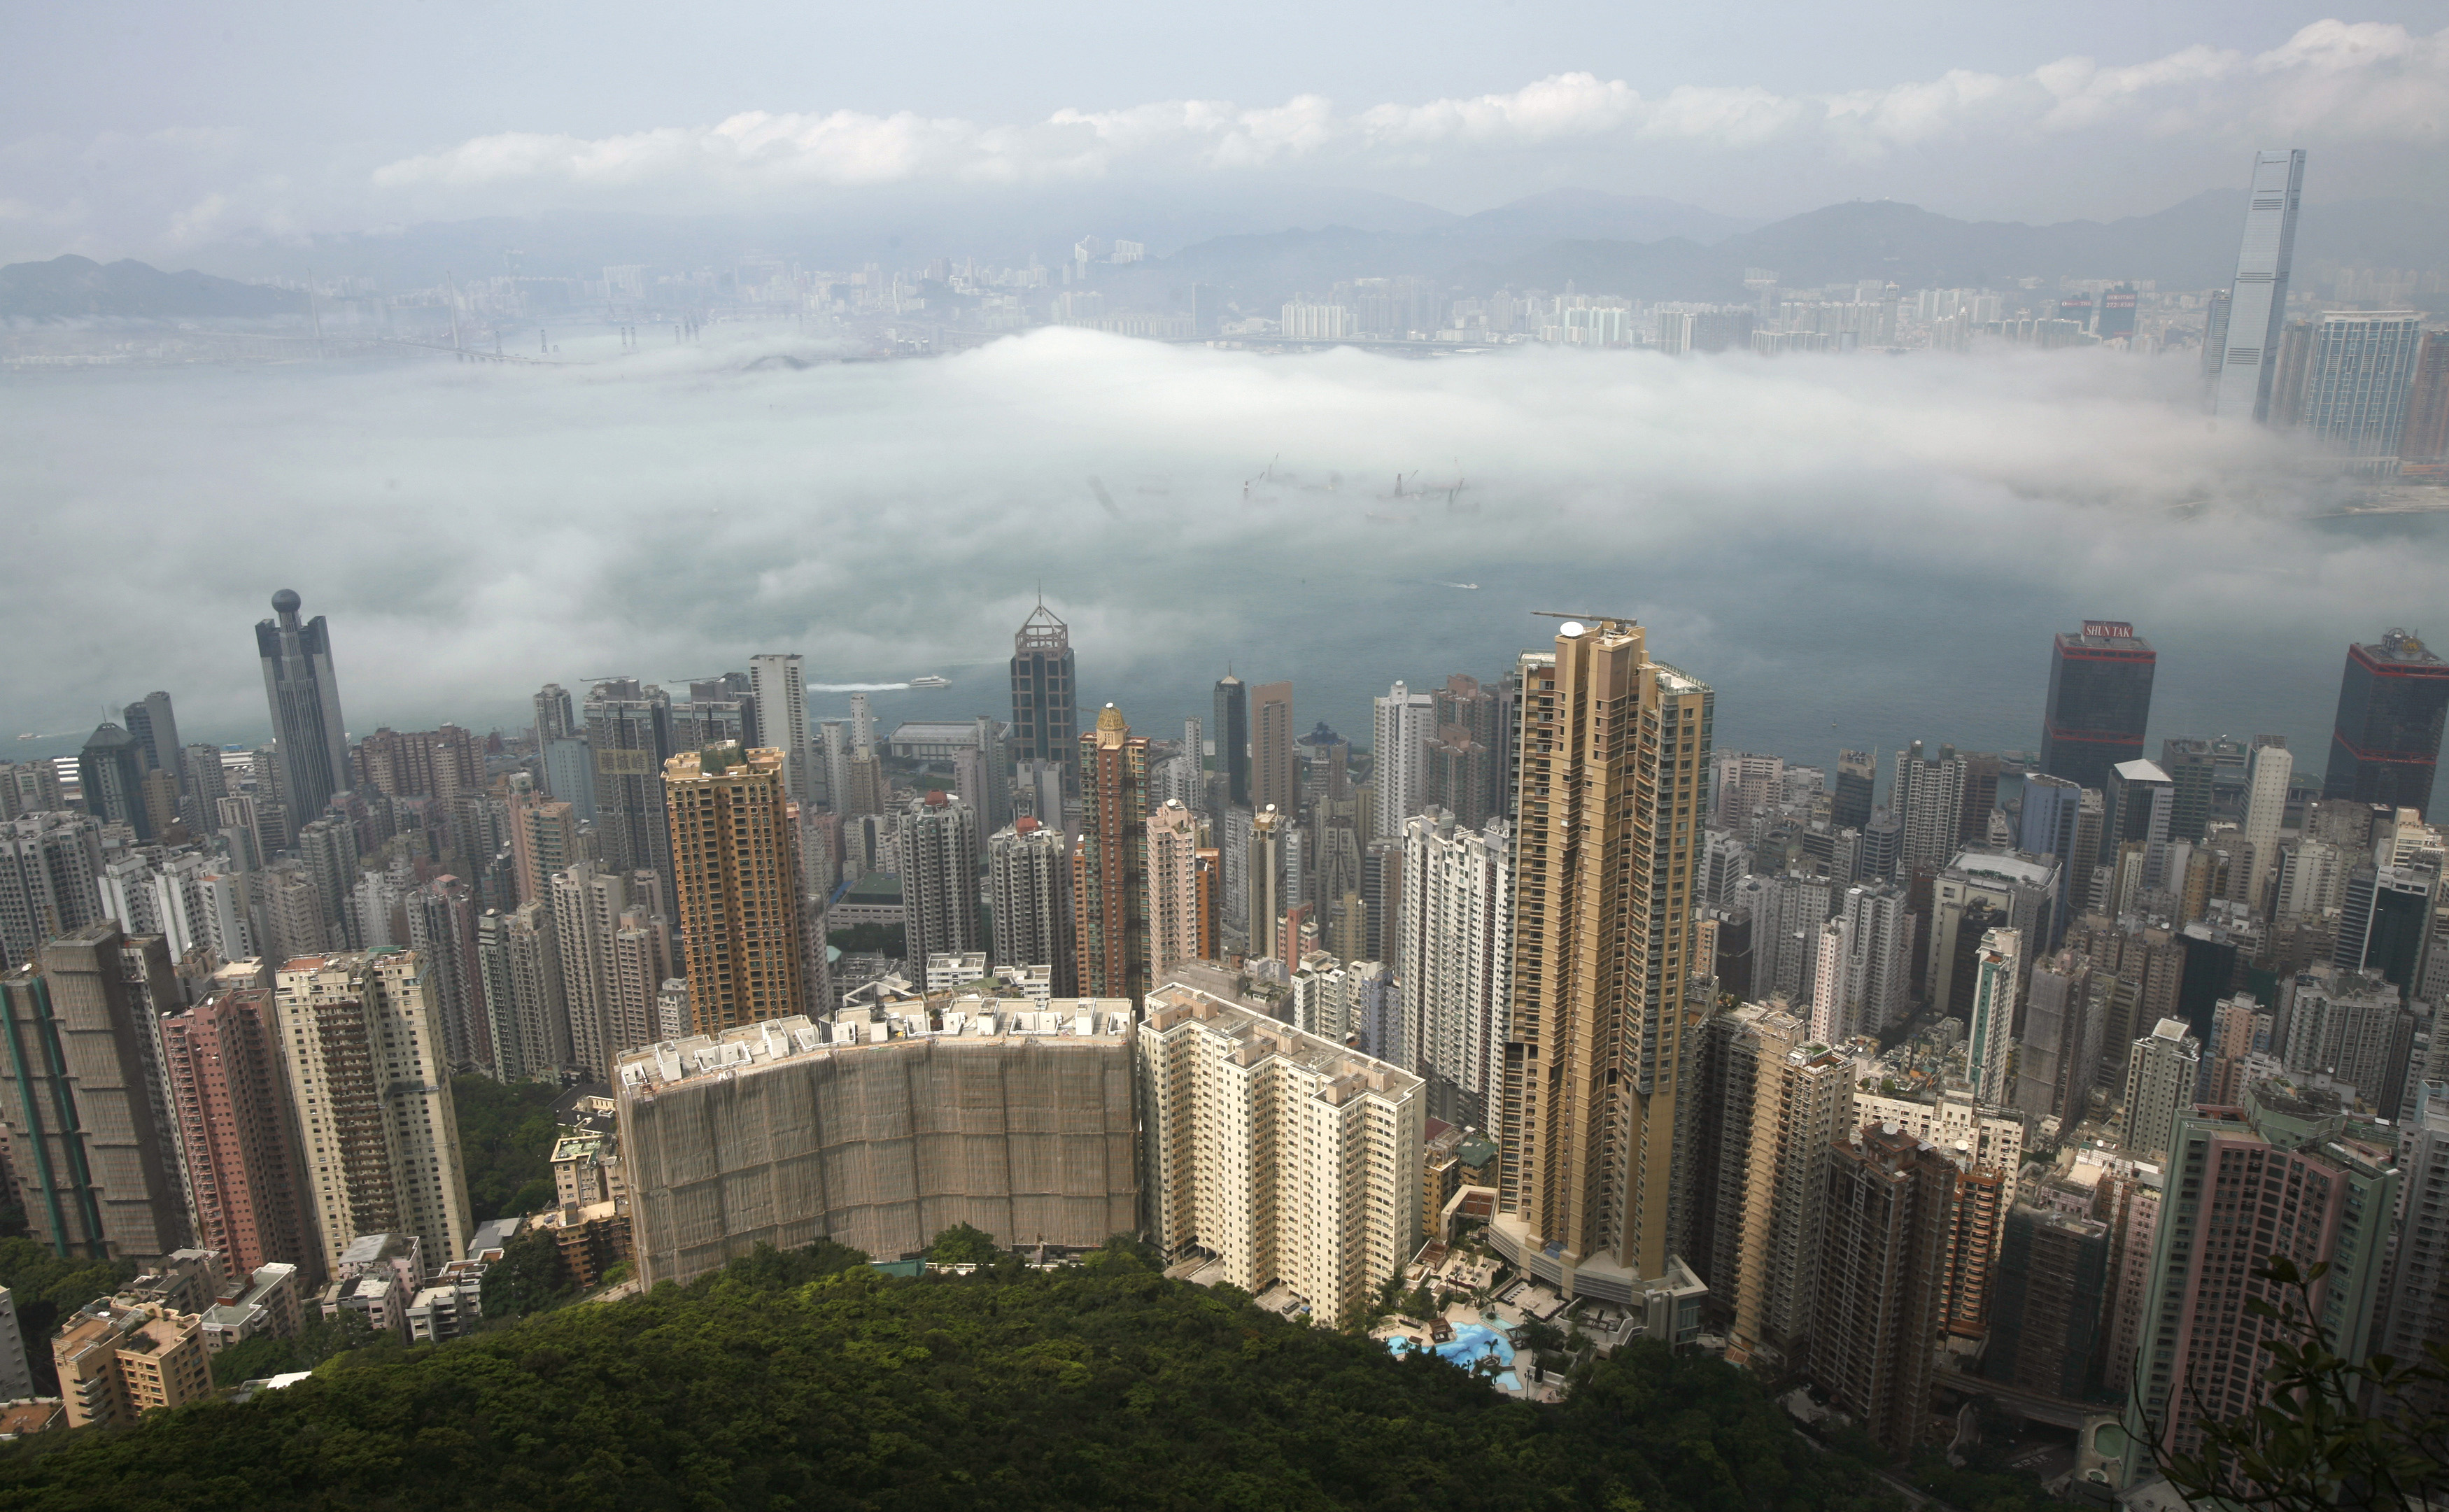 20 years on, is Hong Kong the international hub it was hoped to be?